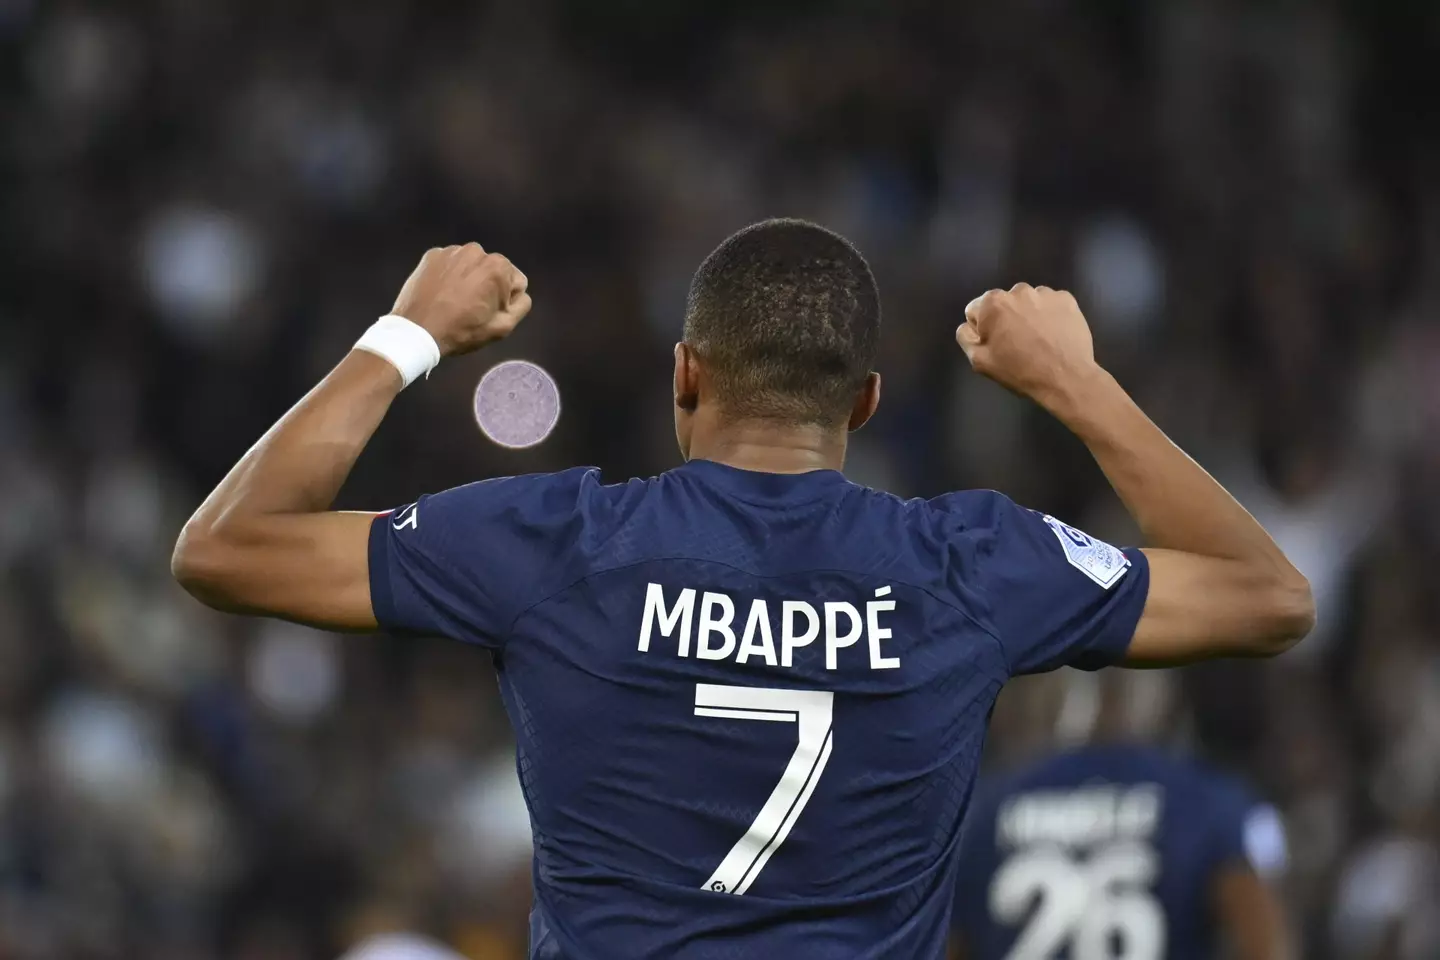 The France international is reportedly unhappy at the Parc des Princes (Image: Alamy)